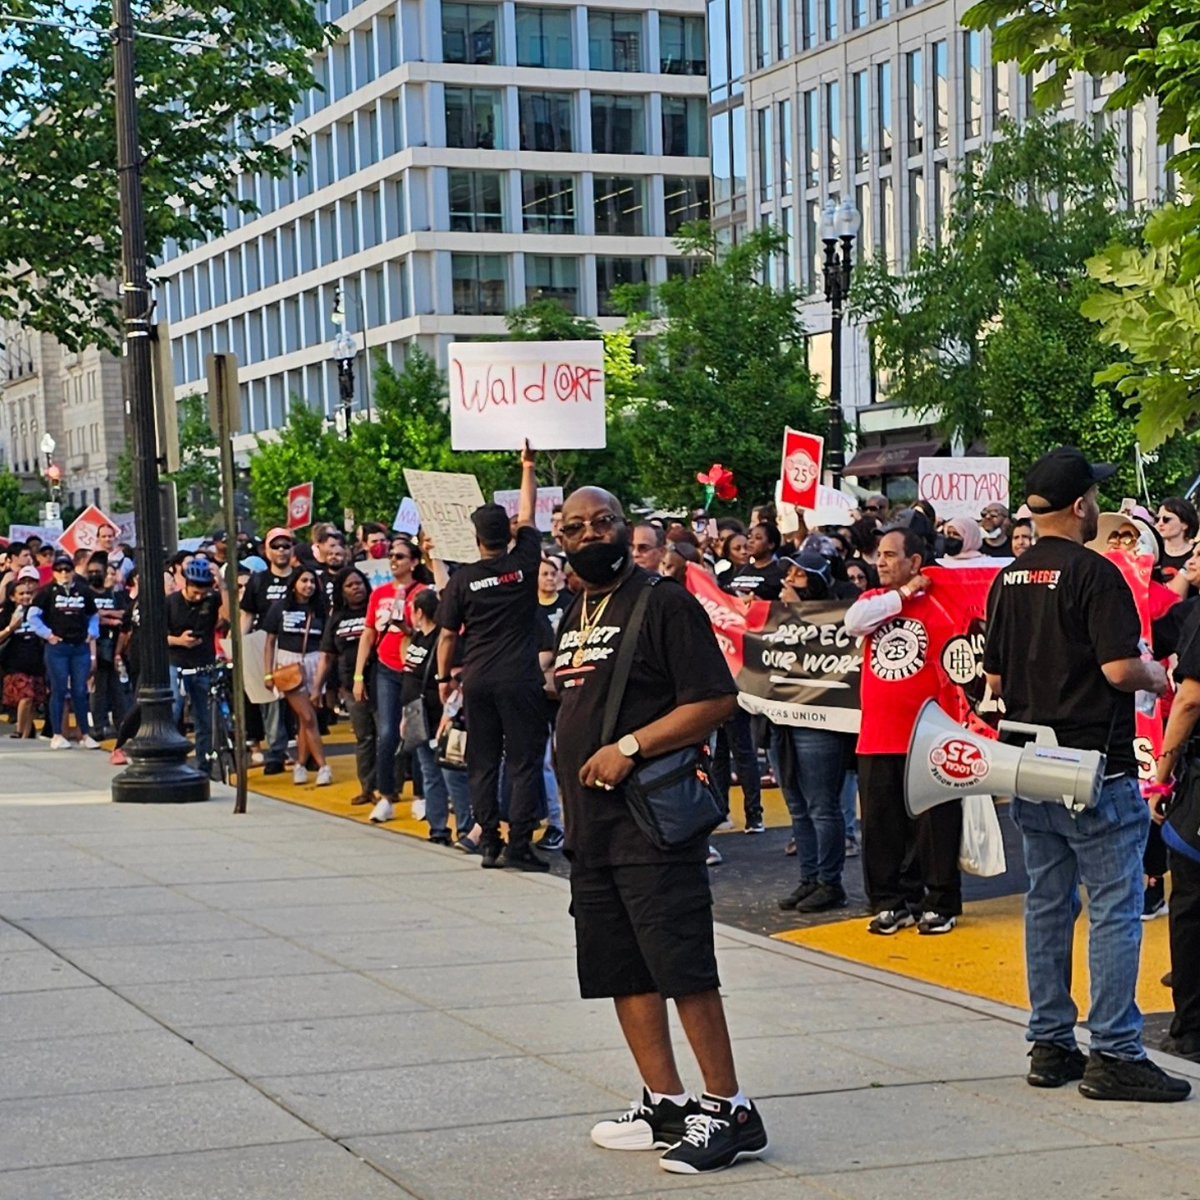 This is what #MayDay looks like! The @WydownUnited workers standing with the @UHLocal25 Hotel workers at their rally & march in DC along with the @IAFF36 standing with them! #1u #wumarjb #wunomatterwhat #InternationalWorkersDay #unionsolidarity